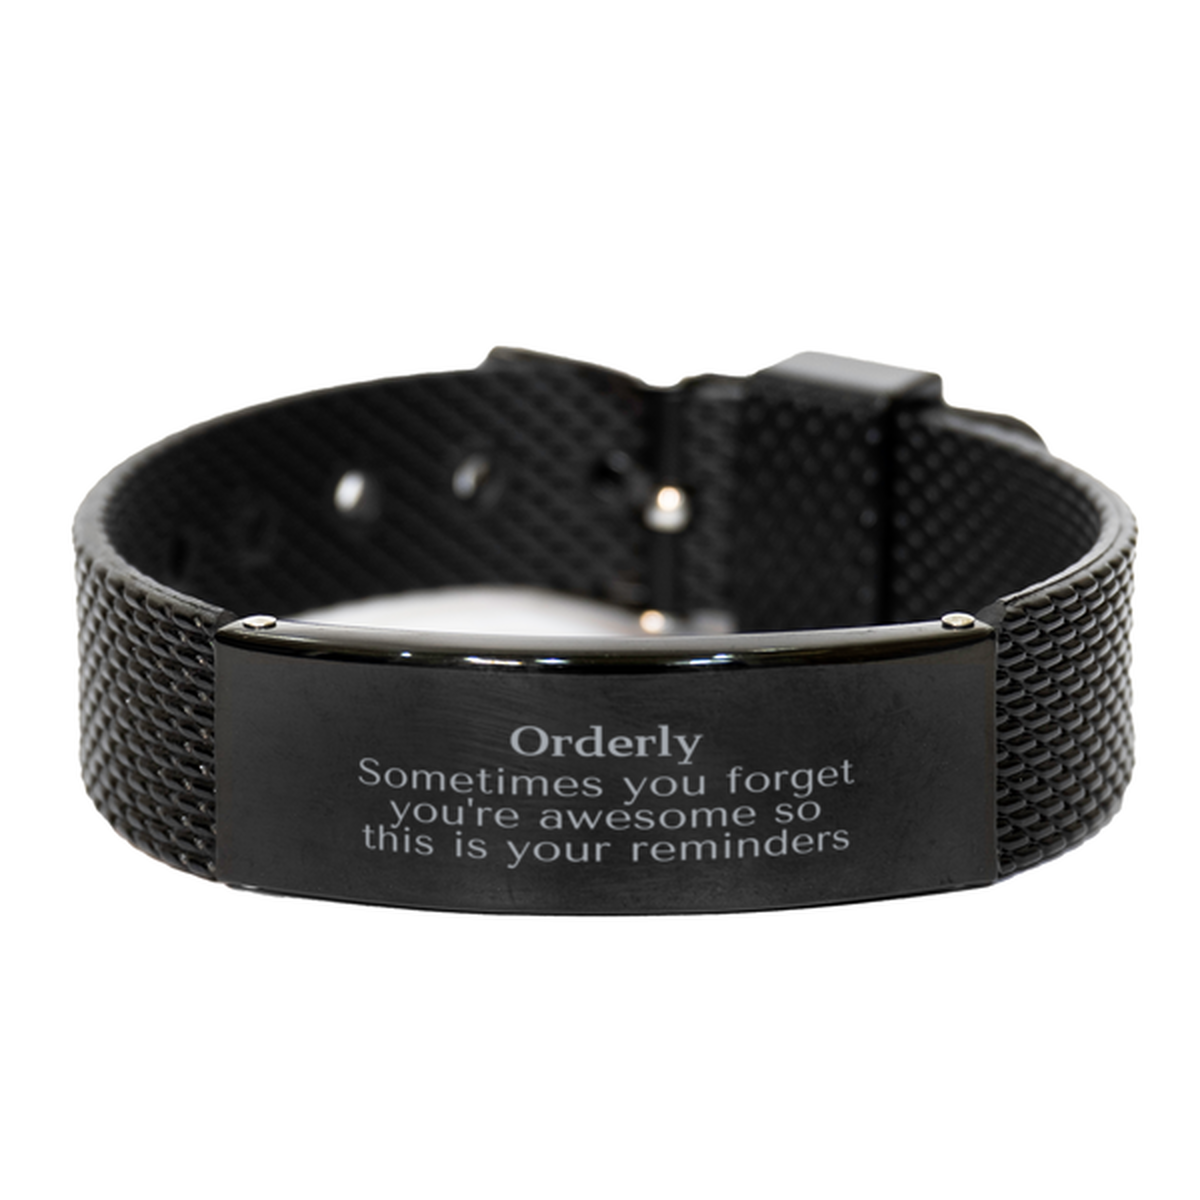 Sentimental Orderly Black Shark Mesh Bracelet, Orderly Sometimes you forget you're awesome so this is your reminders, Graduation Christmas Birthday Gifts for Orderly, Men, Women, Coworkers